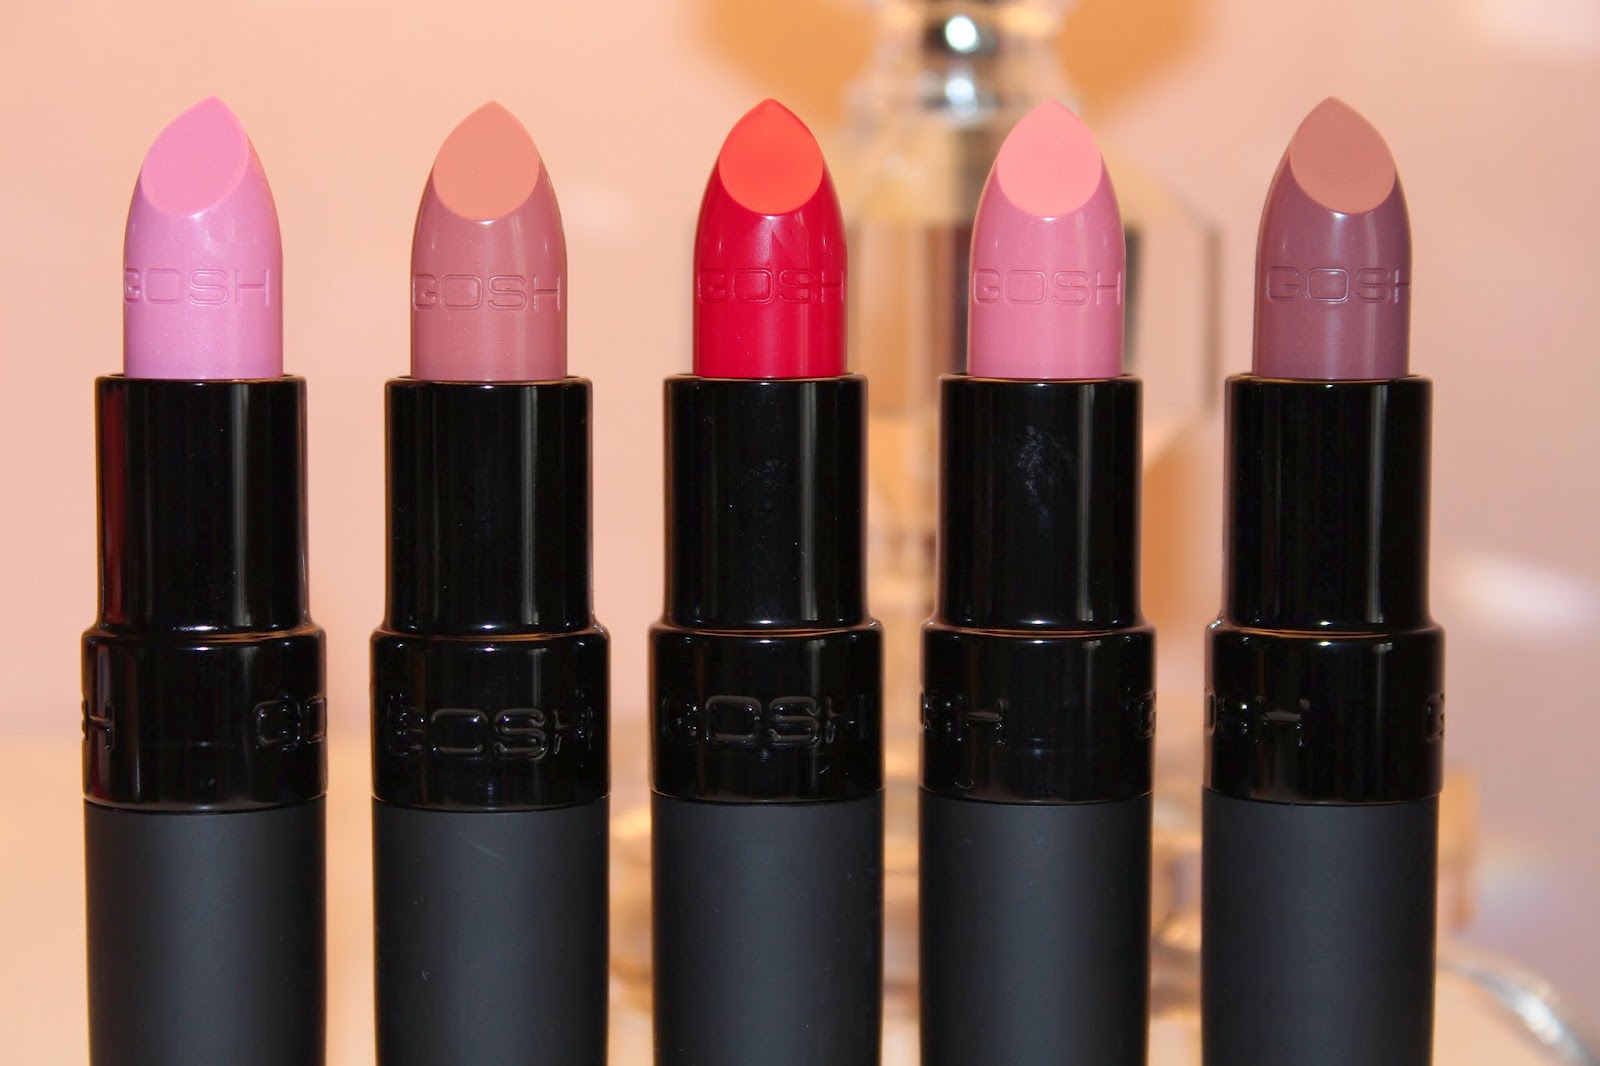 how to wear bright lipstick